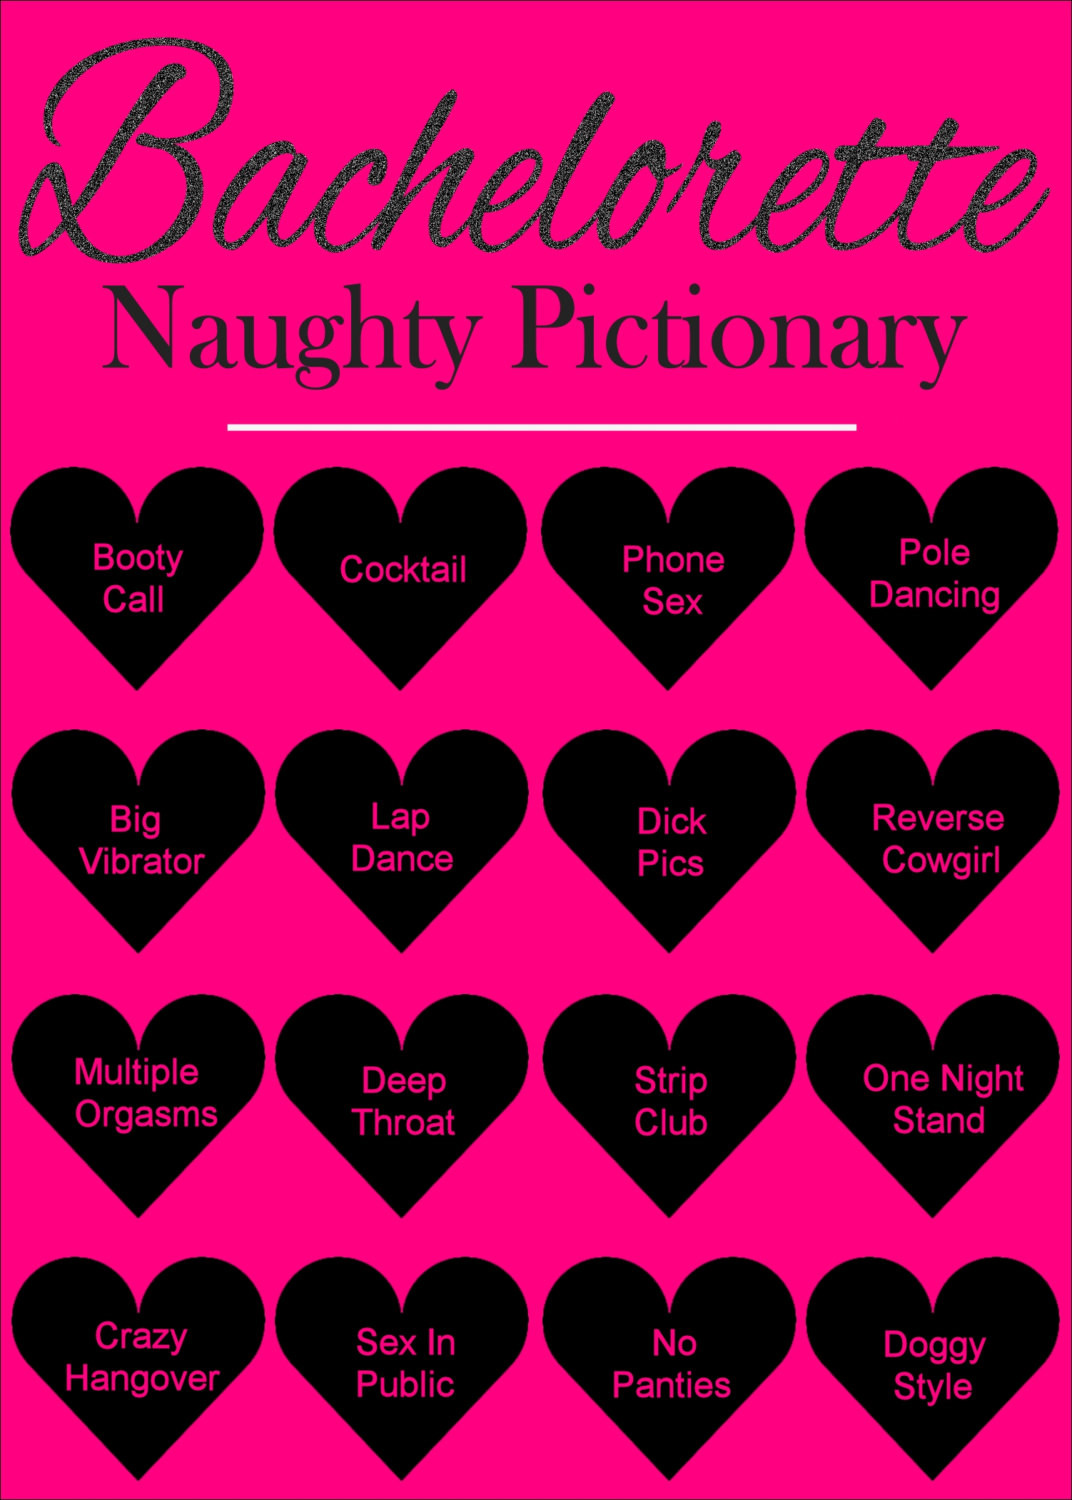 Raunchy Bachelorette Party Ideas
 Bachelorette Party Games Dirty Pictionary by